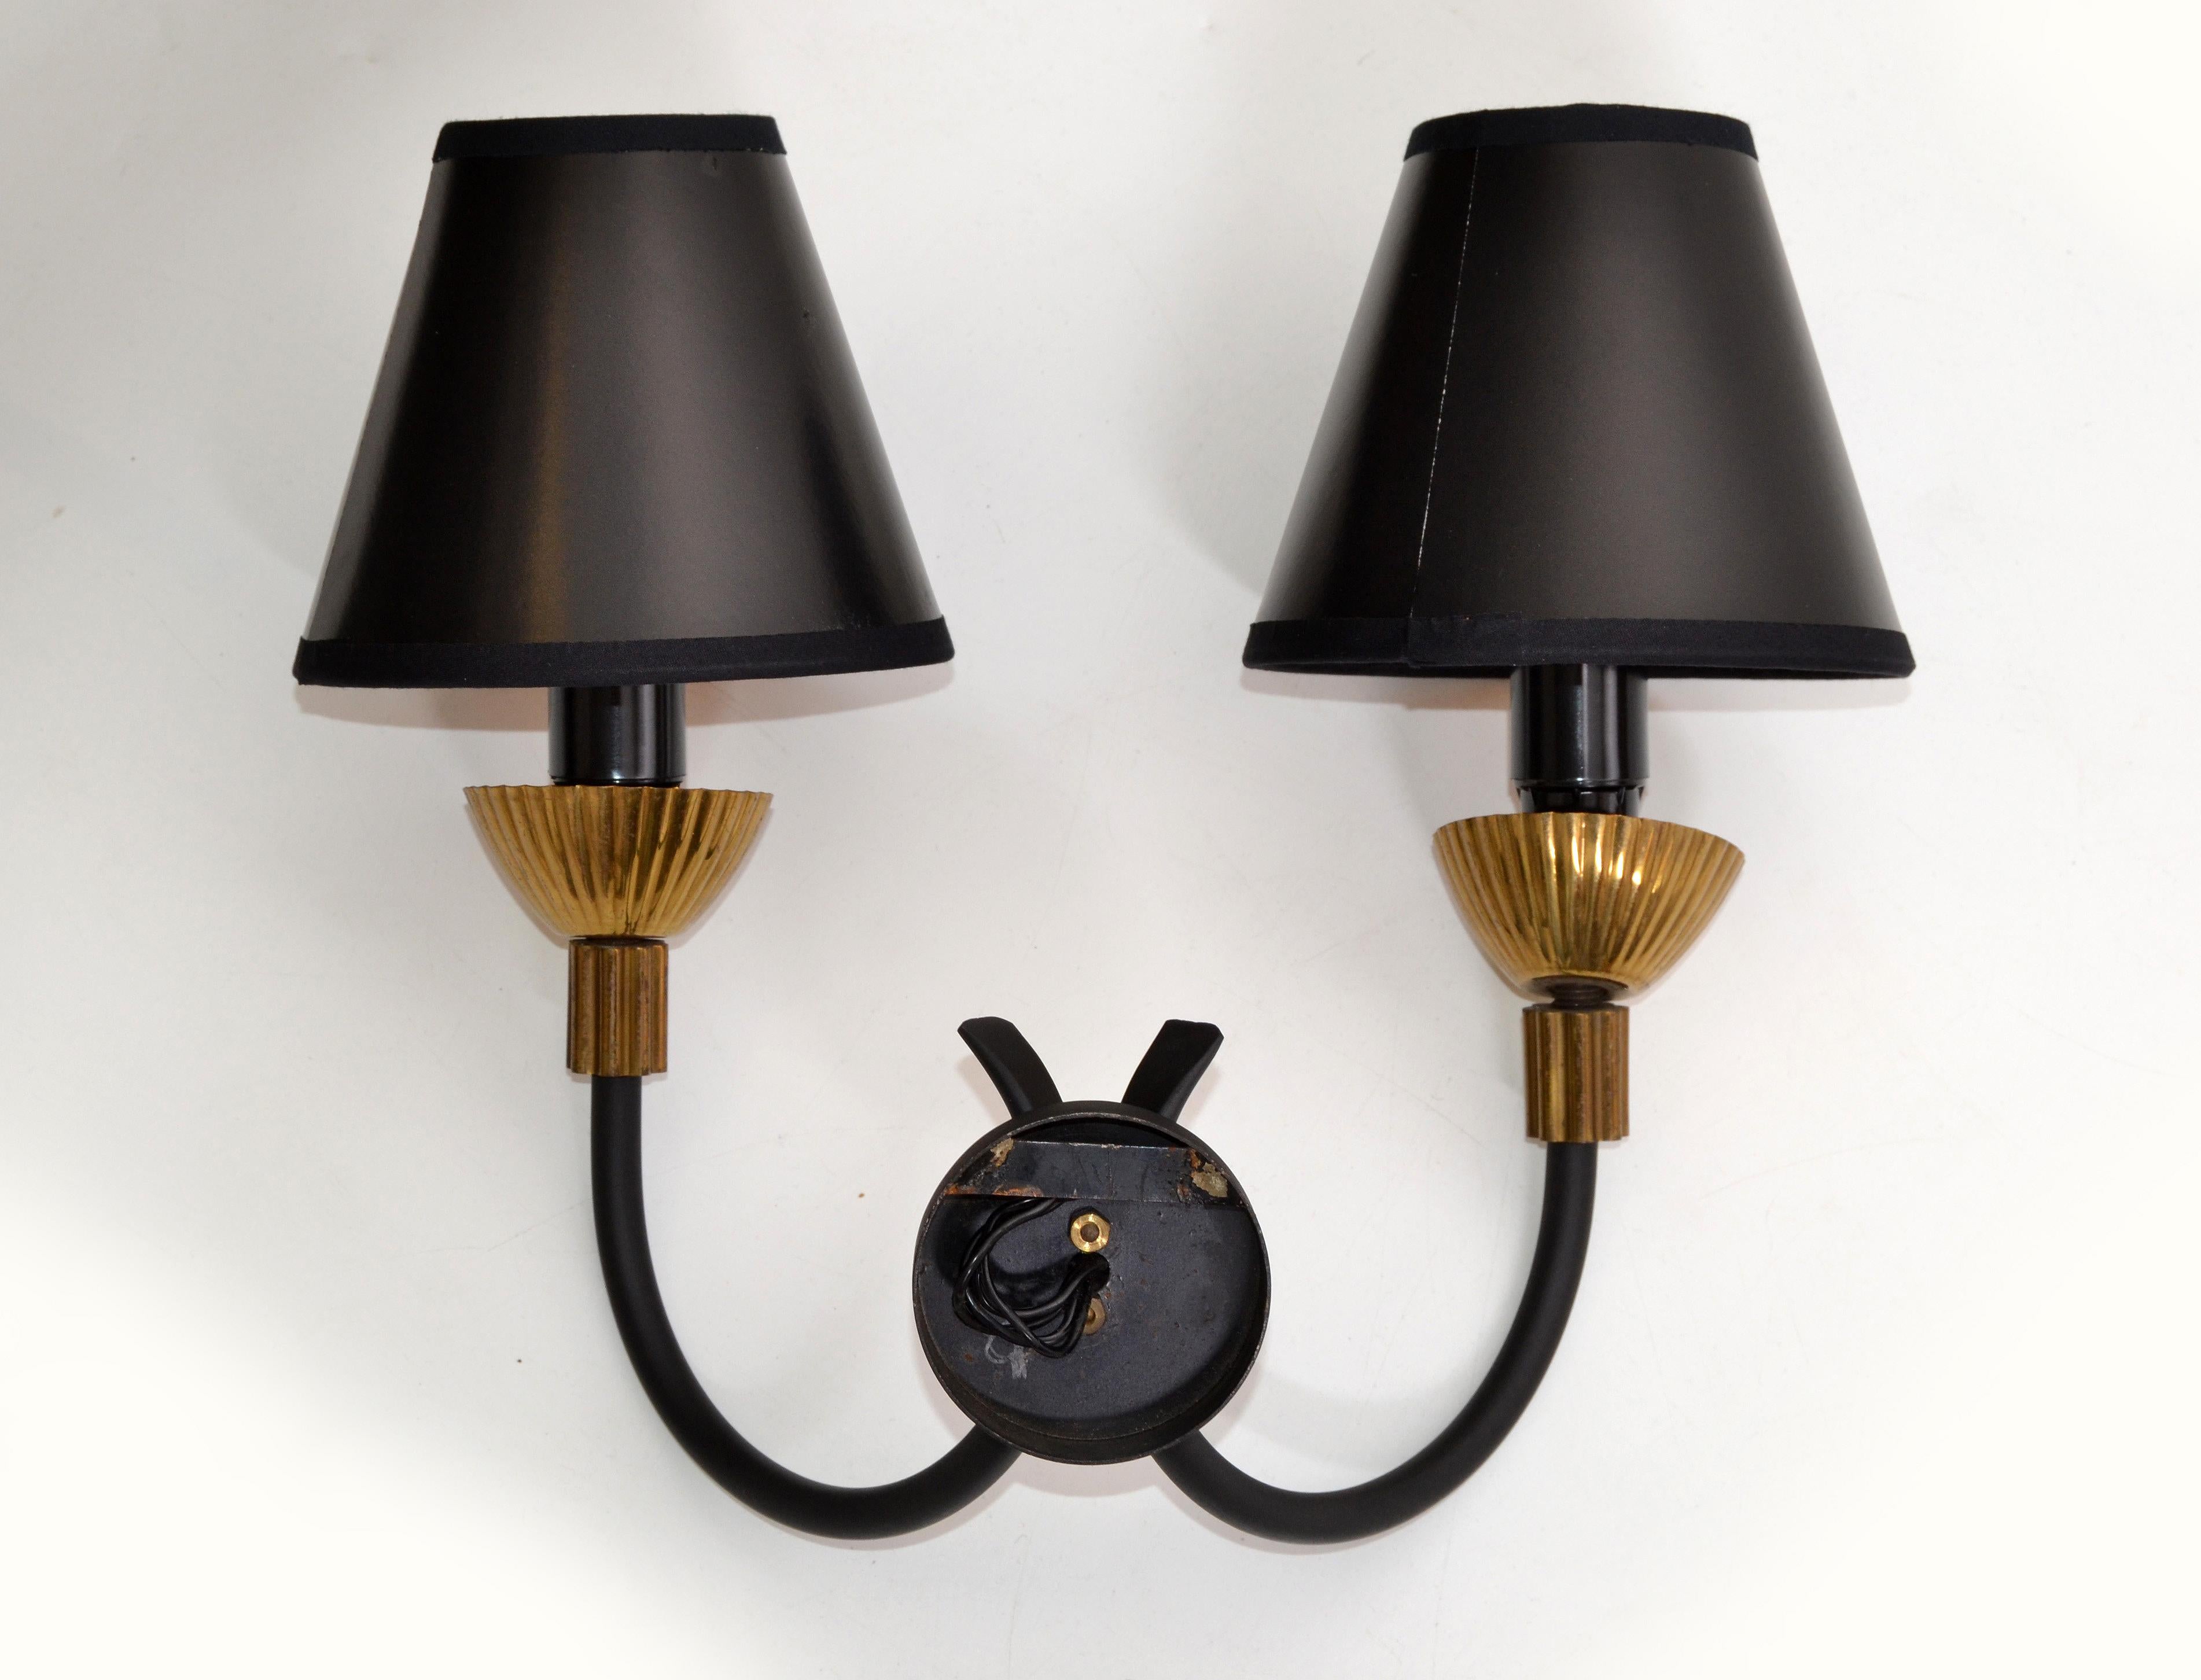 Maison Lunel Pair of Sconces Mid-Century Modern France, 2 pairs Available  6